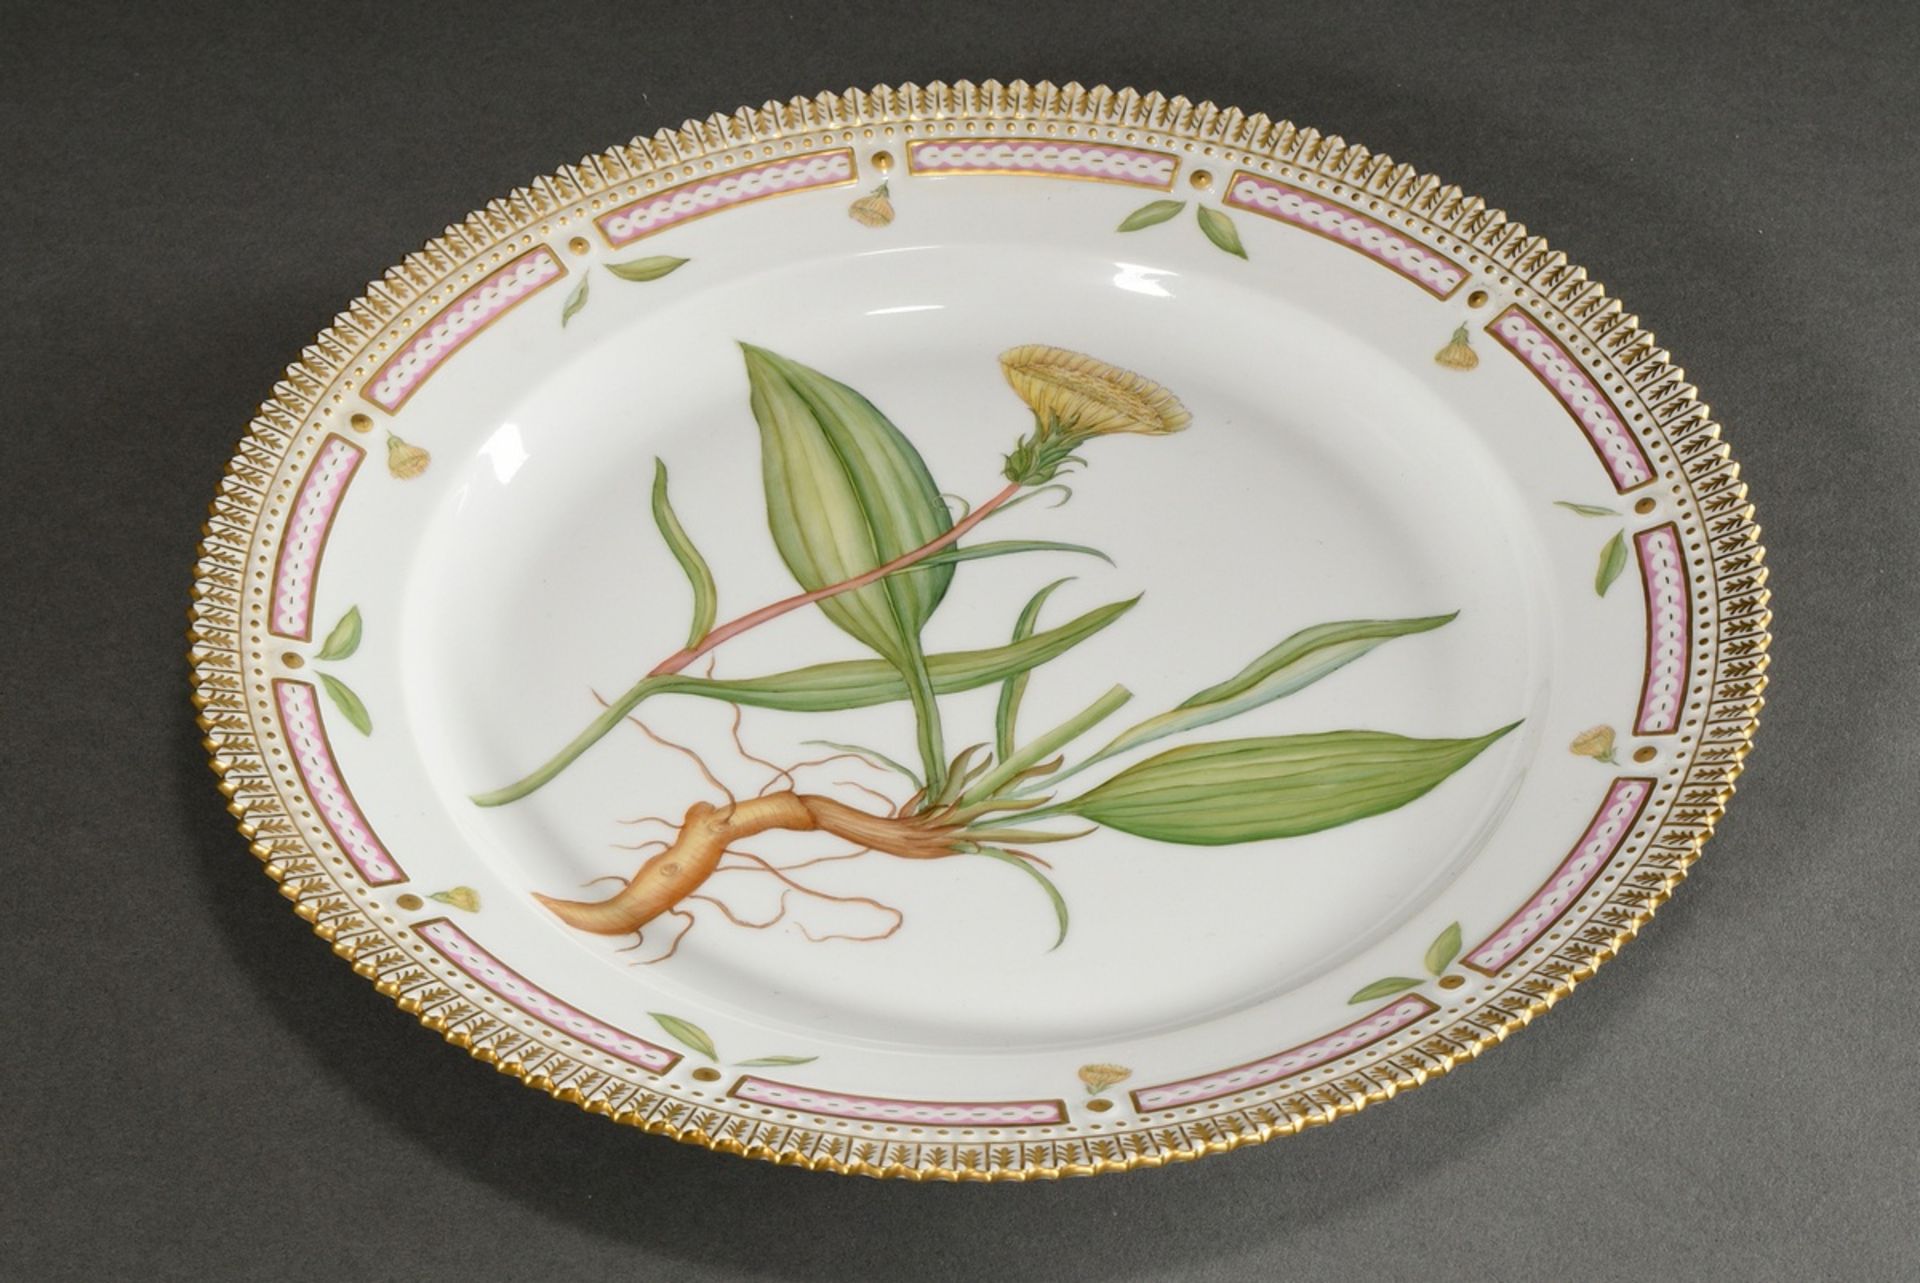 Large Royal Copenhagen "Flora Danica" plate with polychrome painting in the mirror, gold staffage a - Image 2 of 7